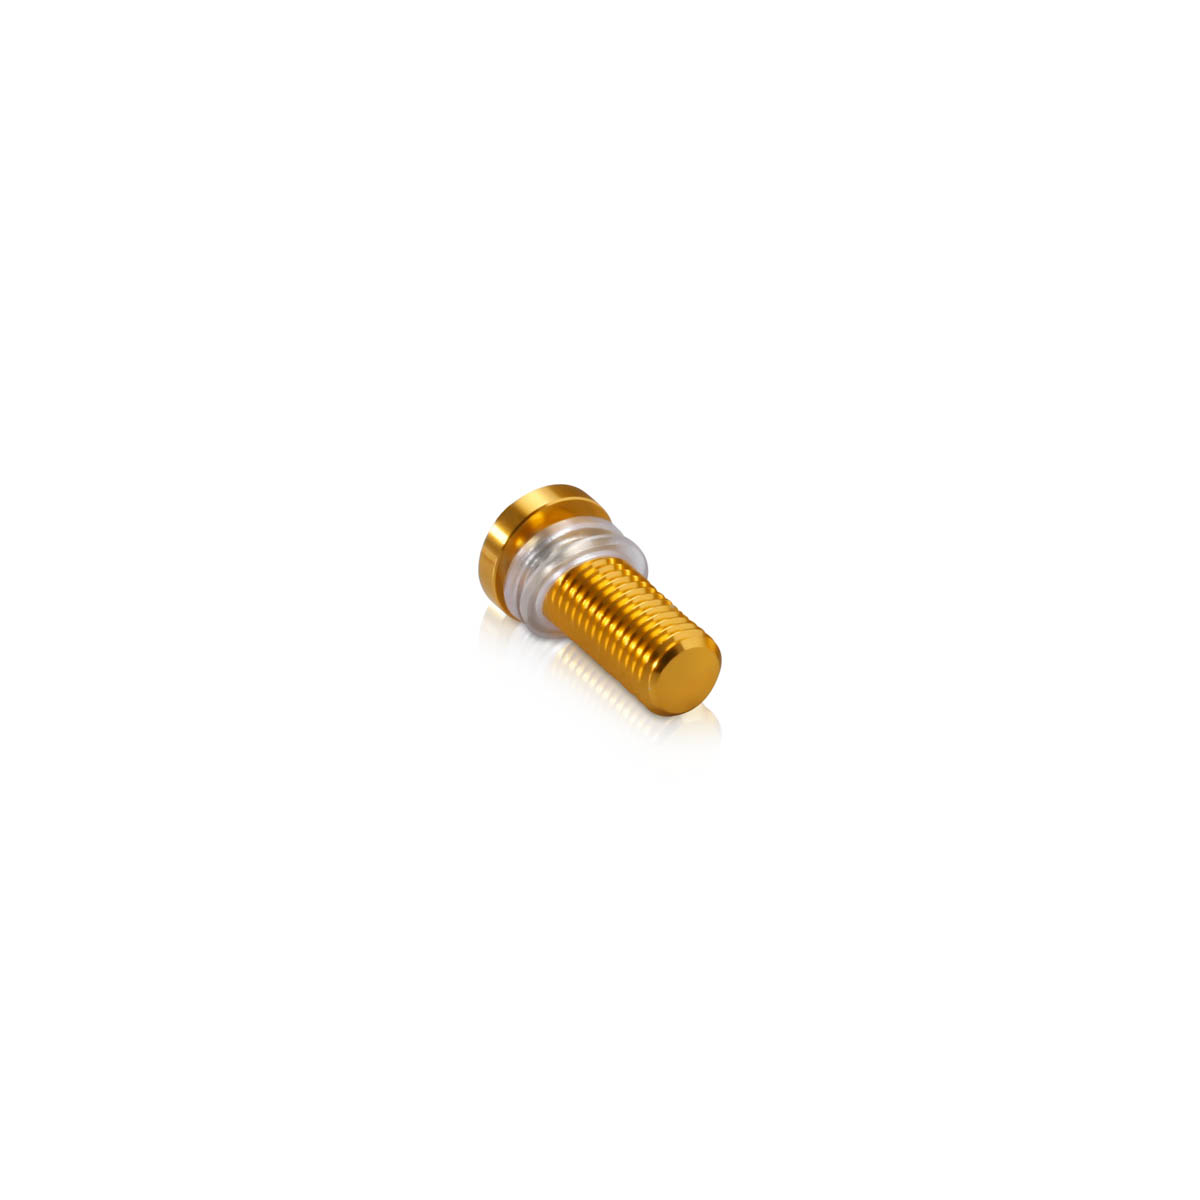 AL12-25G, AL12-30G, AL12-50G, AL12-70GHead replacement for Mbs-Standoffs 1/2'' Diameter, Aluminum Gold Anodized Finish Standoffs (Includes 2 Silicone Washers).